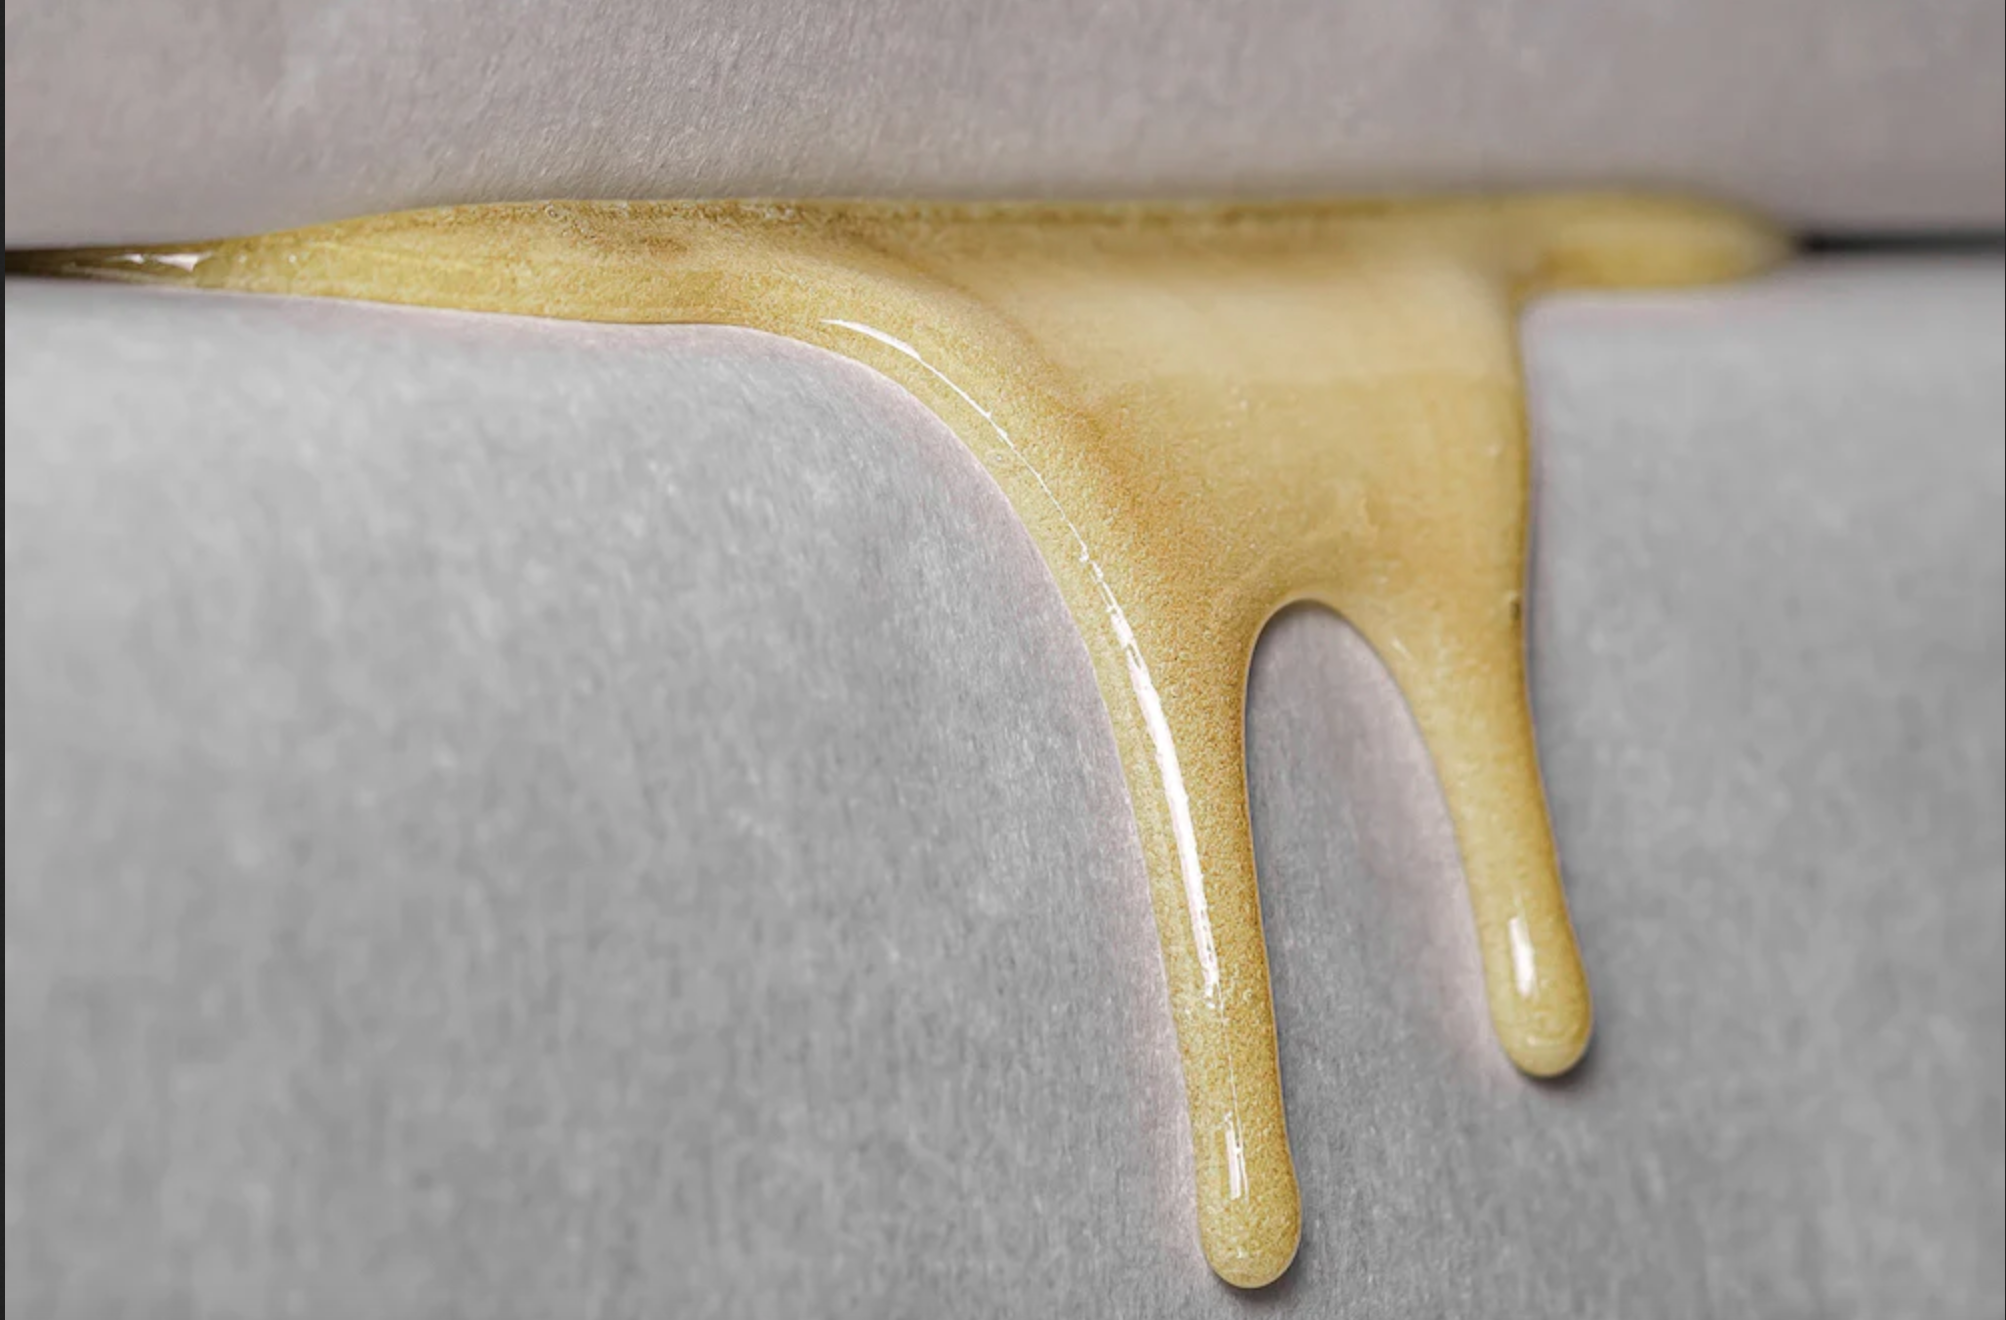 Live rosin is usually made using a rosin press.